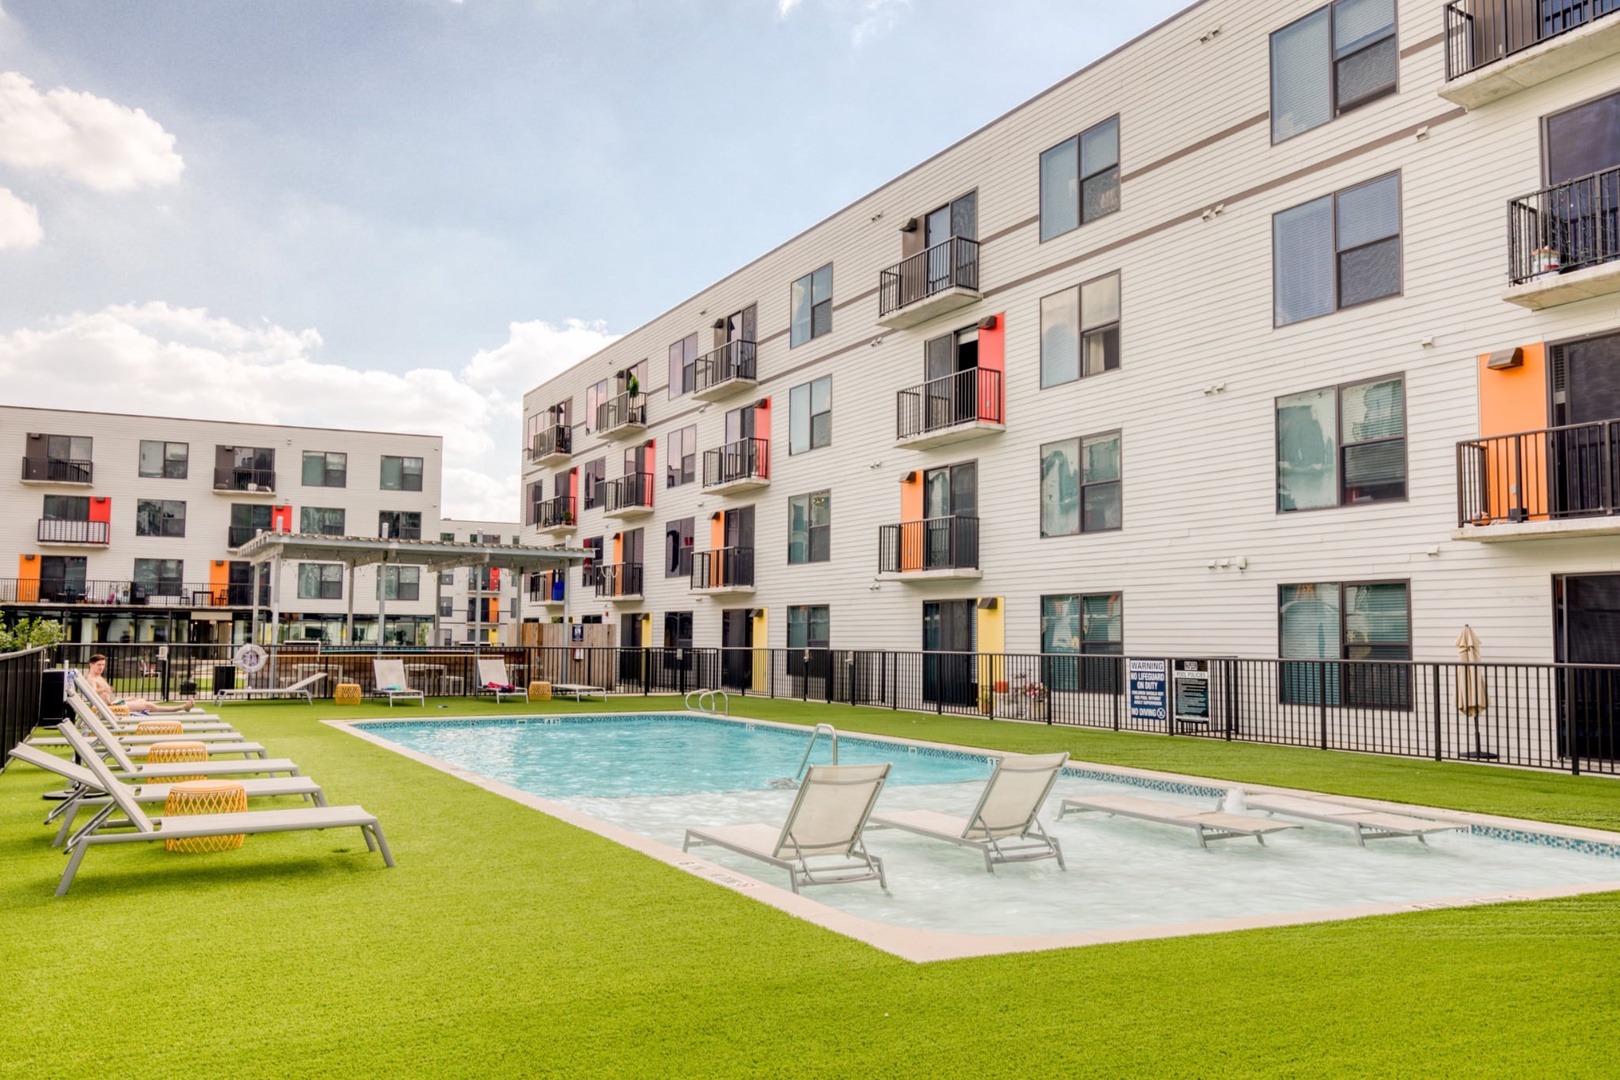 The apartment community features a swimming pool, one acre courtyard, and shared BBQ grills